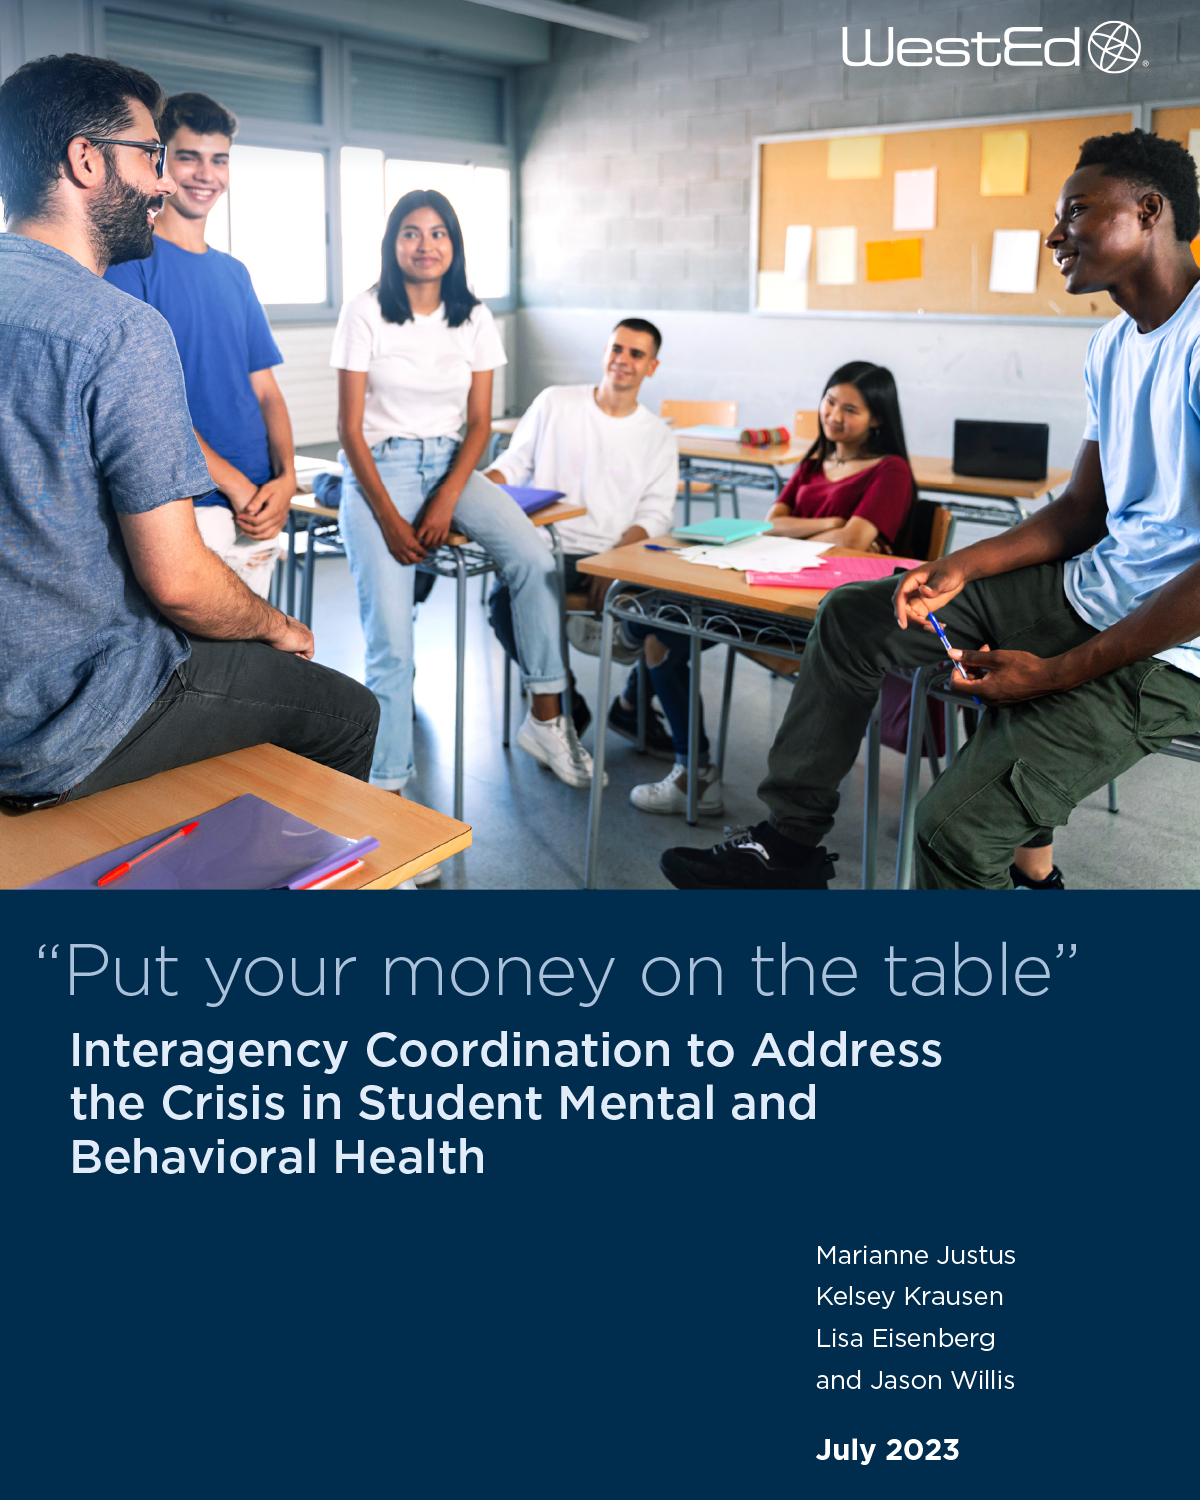 "Put your money on the table" Interagency Coordination to Address the Crisis in Student Mental and Behavioral Health